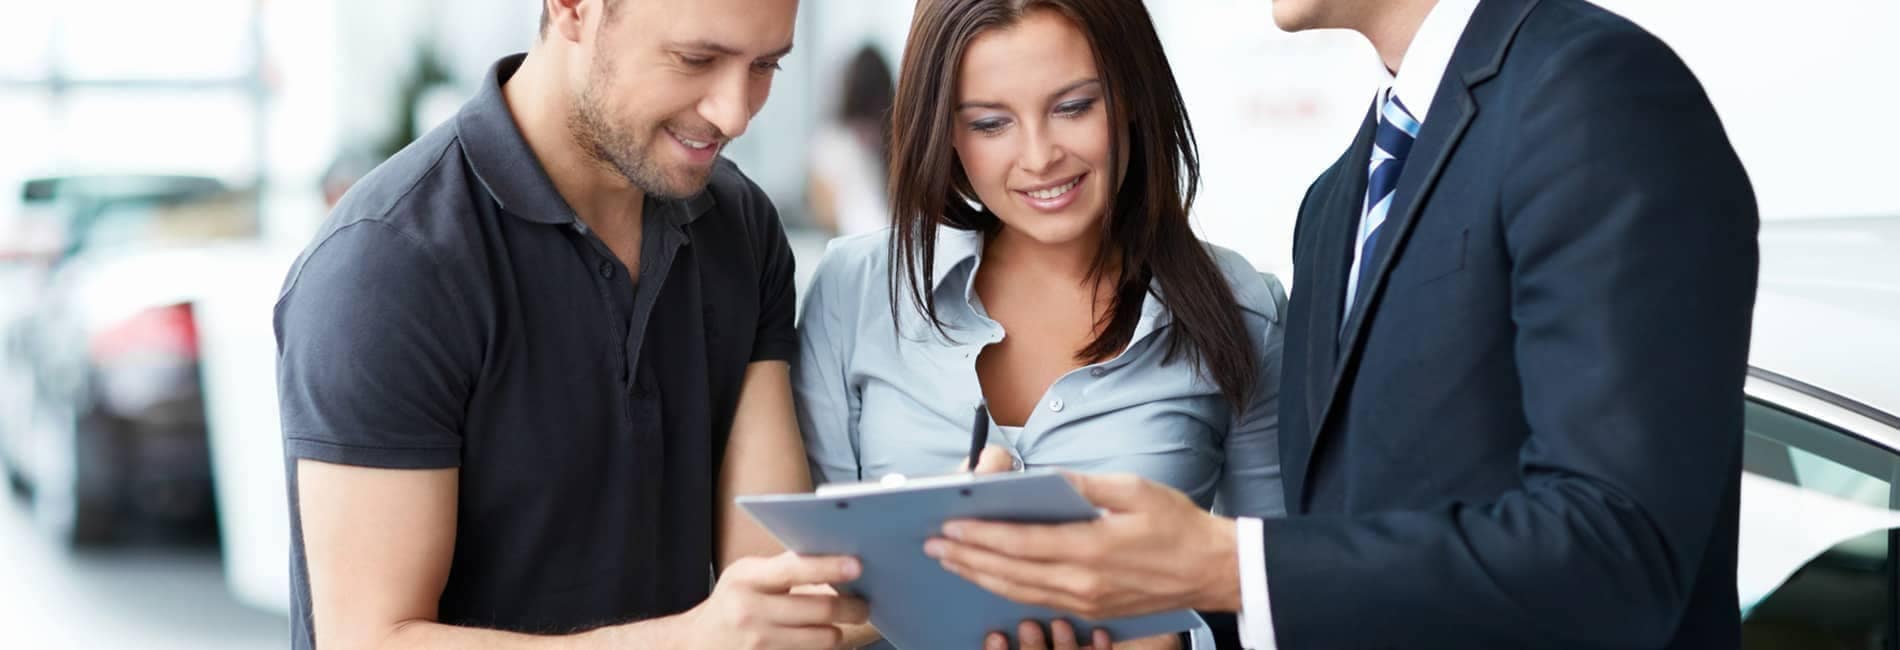 Man-and-Woman-Looking-at-Documents-with-Dealer-Mobile